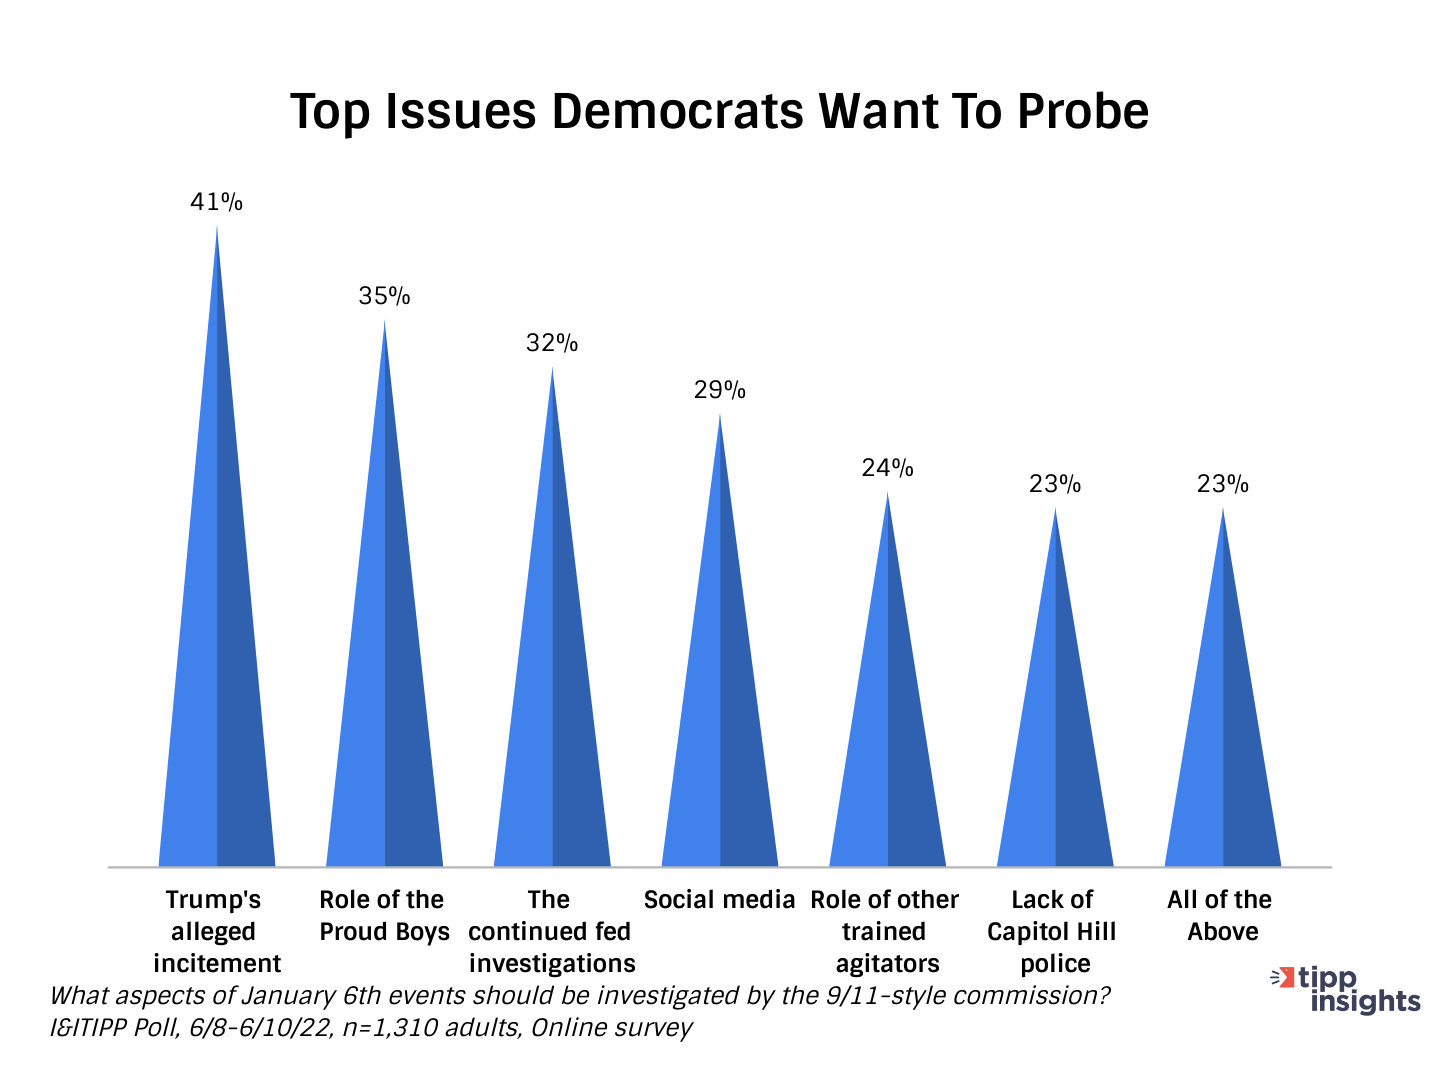 I&I/TIPP Poll Results: What are Democrats top issues that should be probed for January 6th?